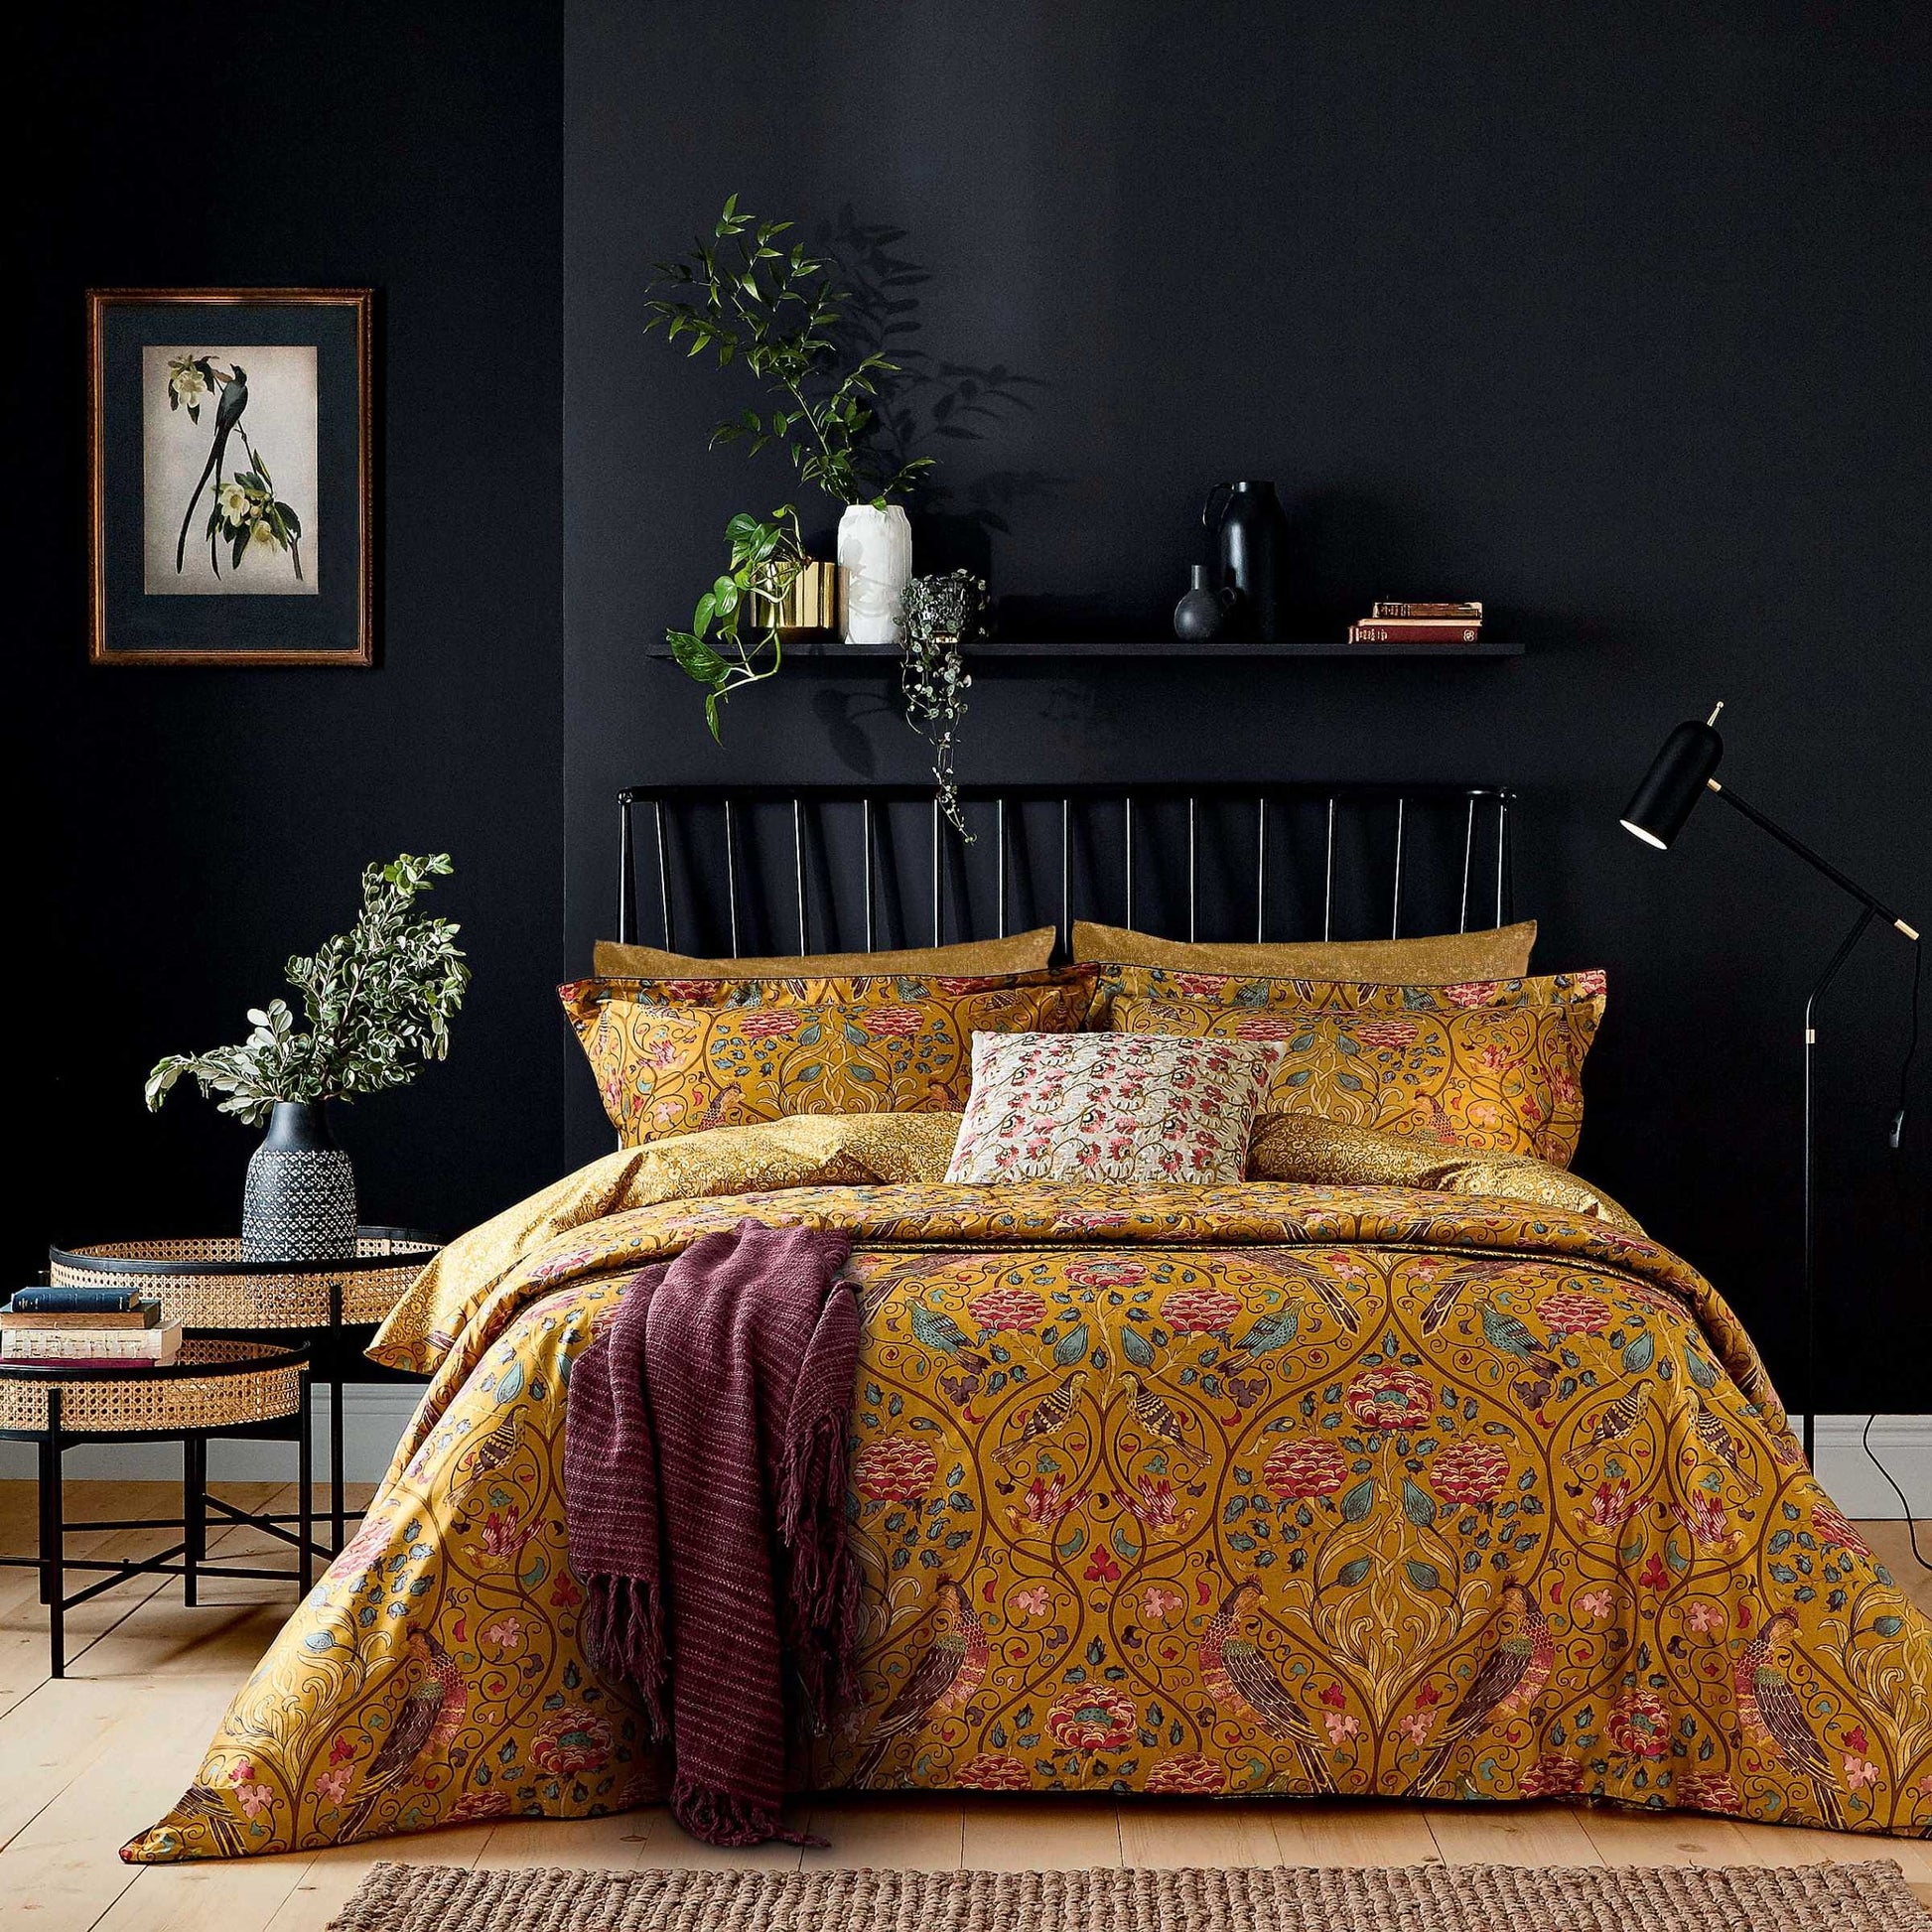 Detailed Print of William Morris Seasons By May Bedding Saffron Yellow